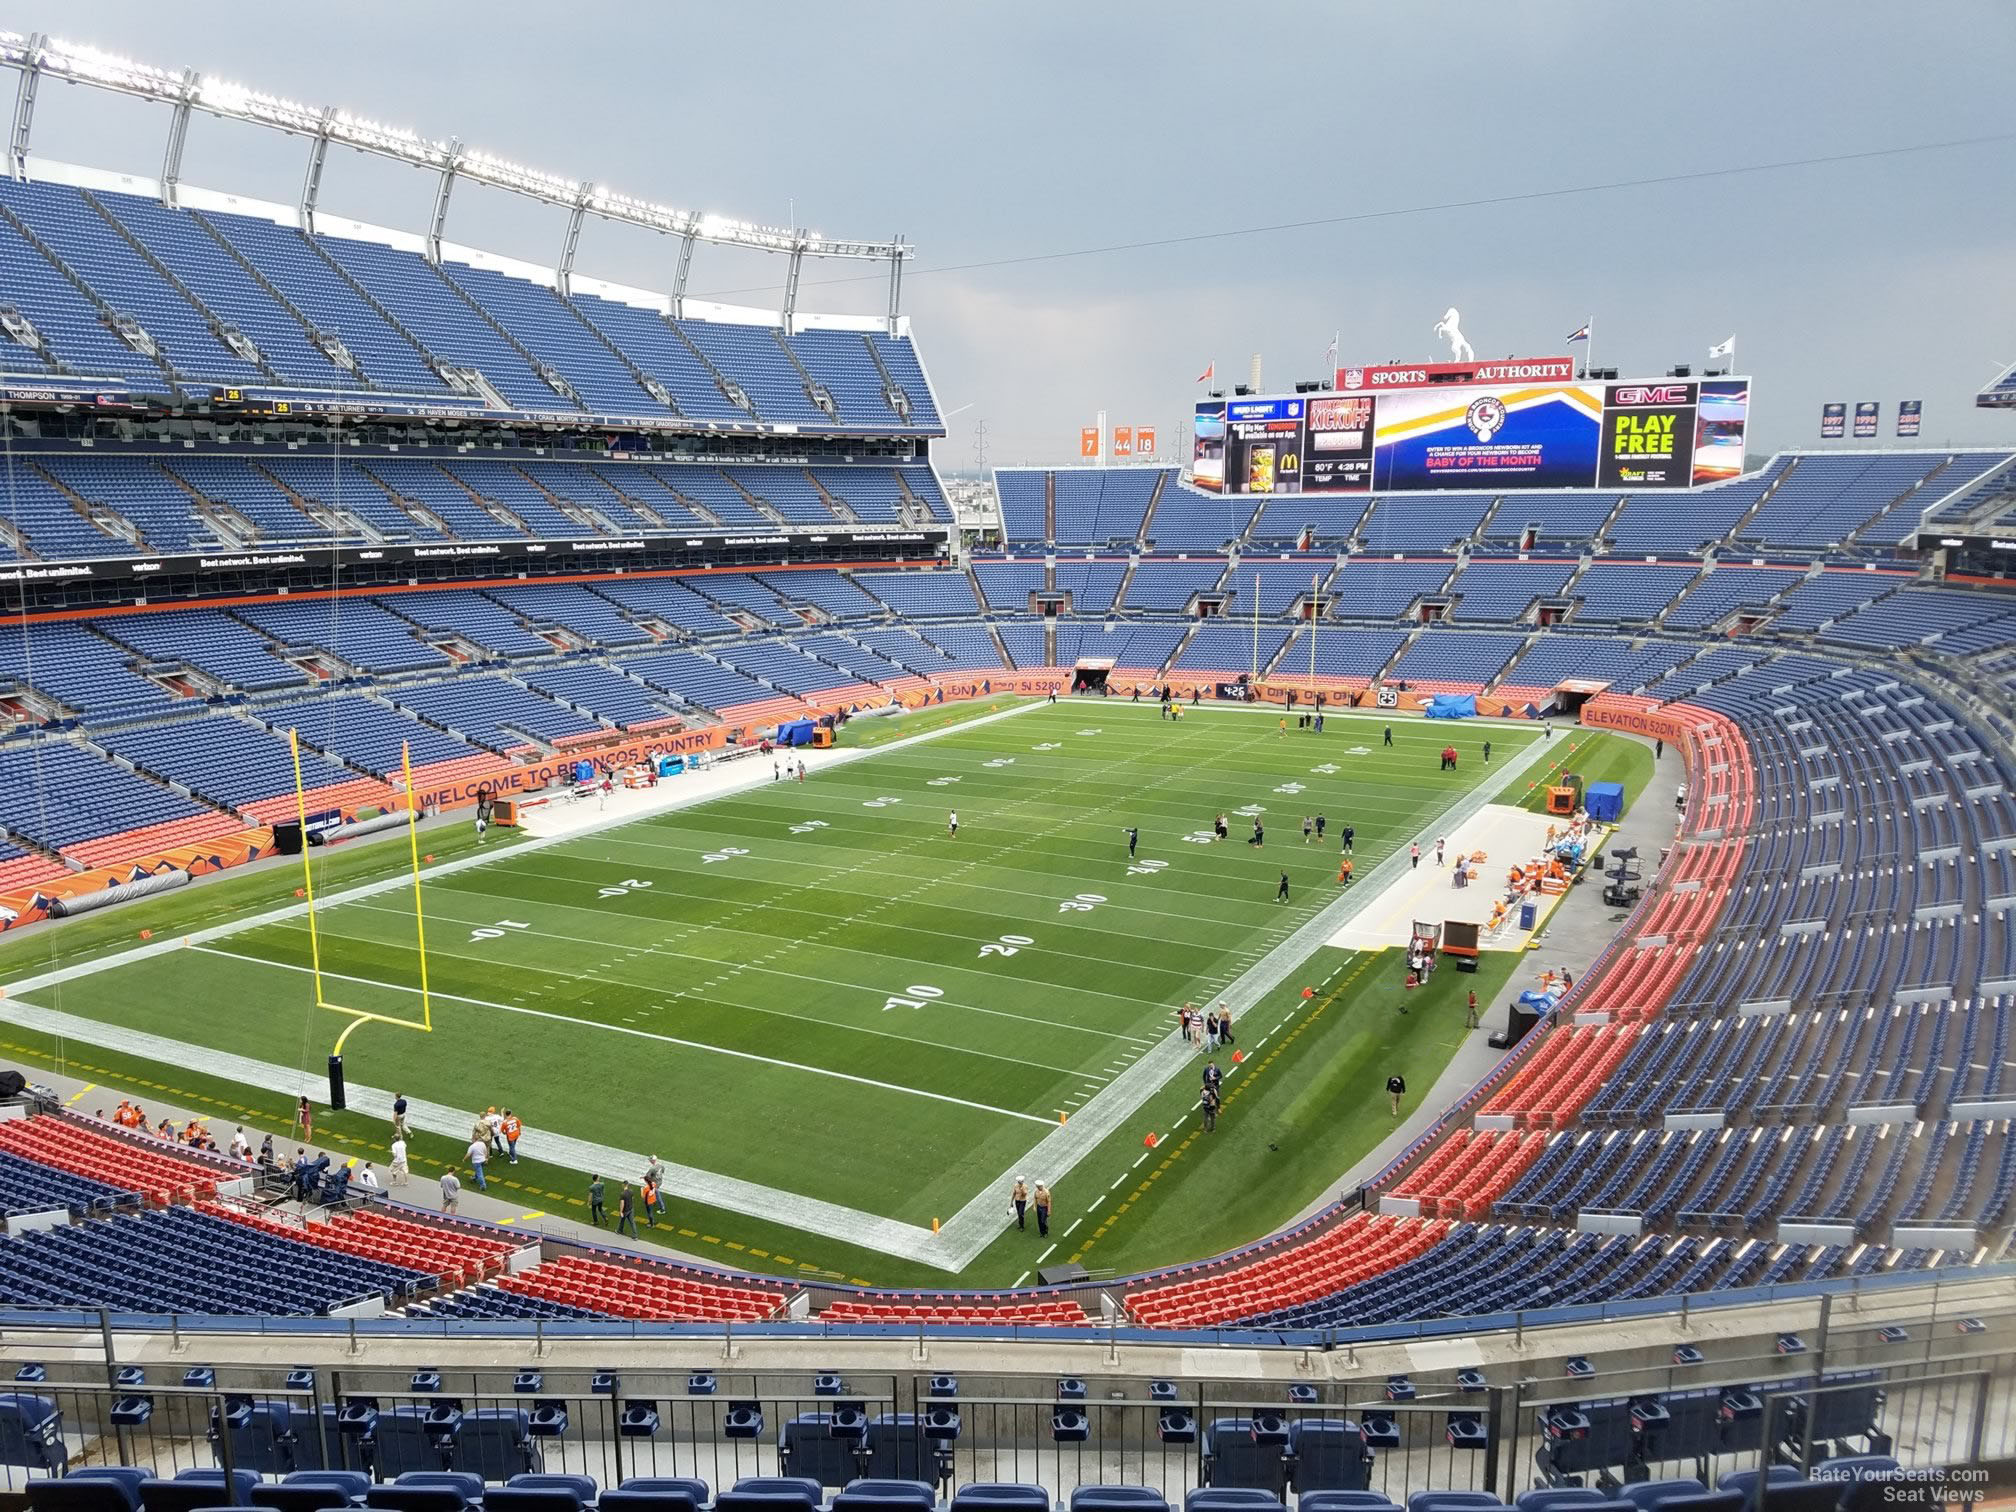 section 319, row 12 seat view  - empower field (at mile high)